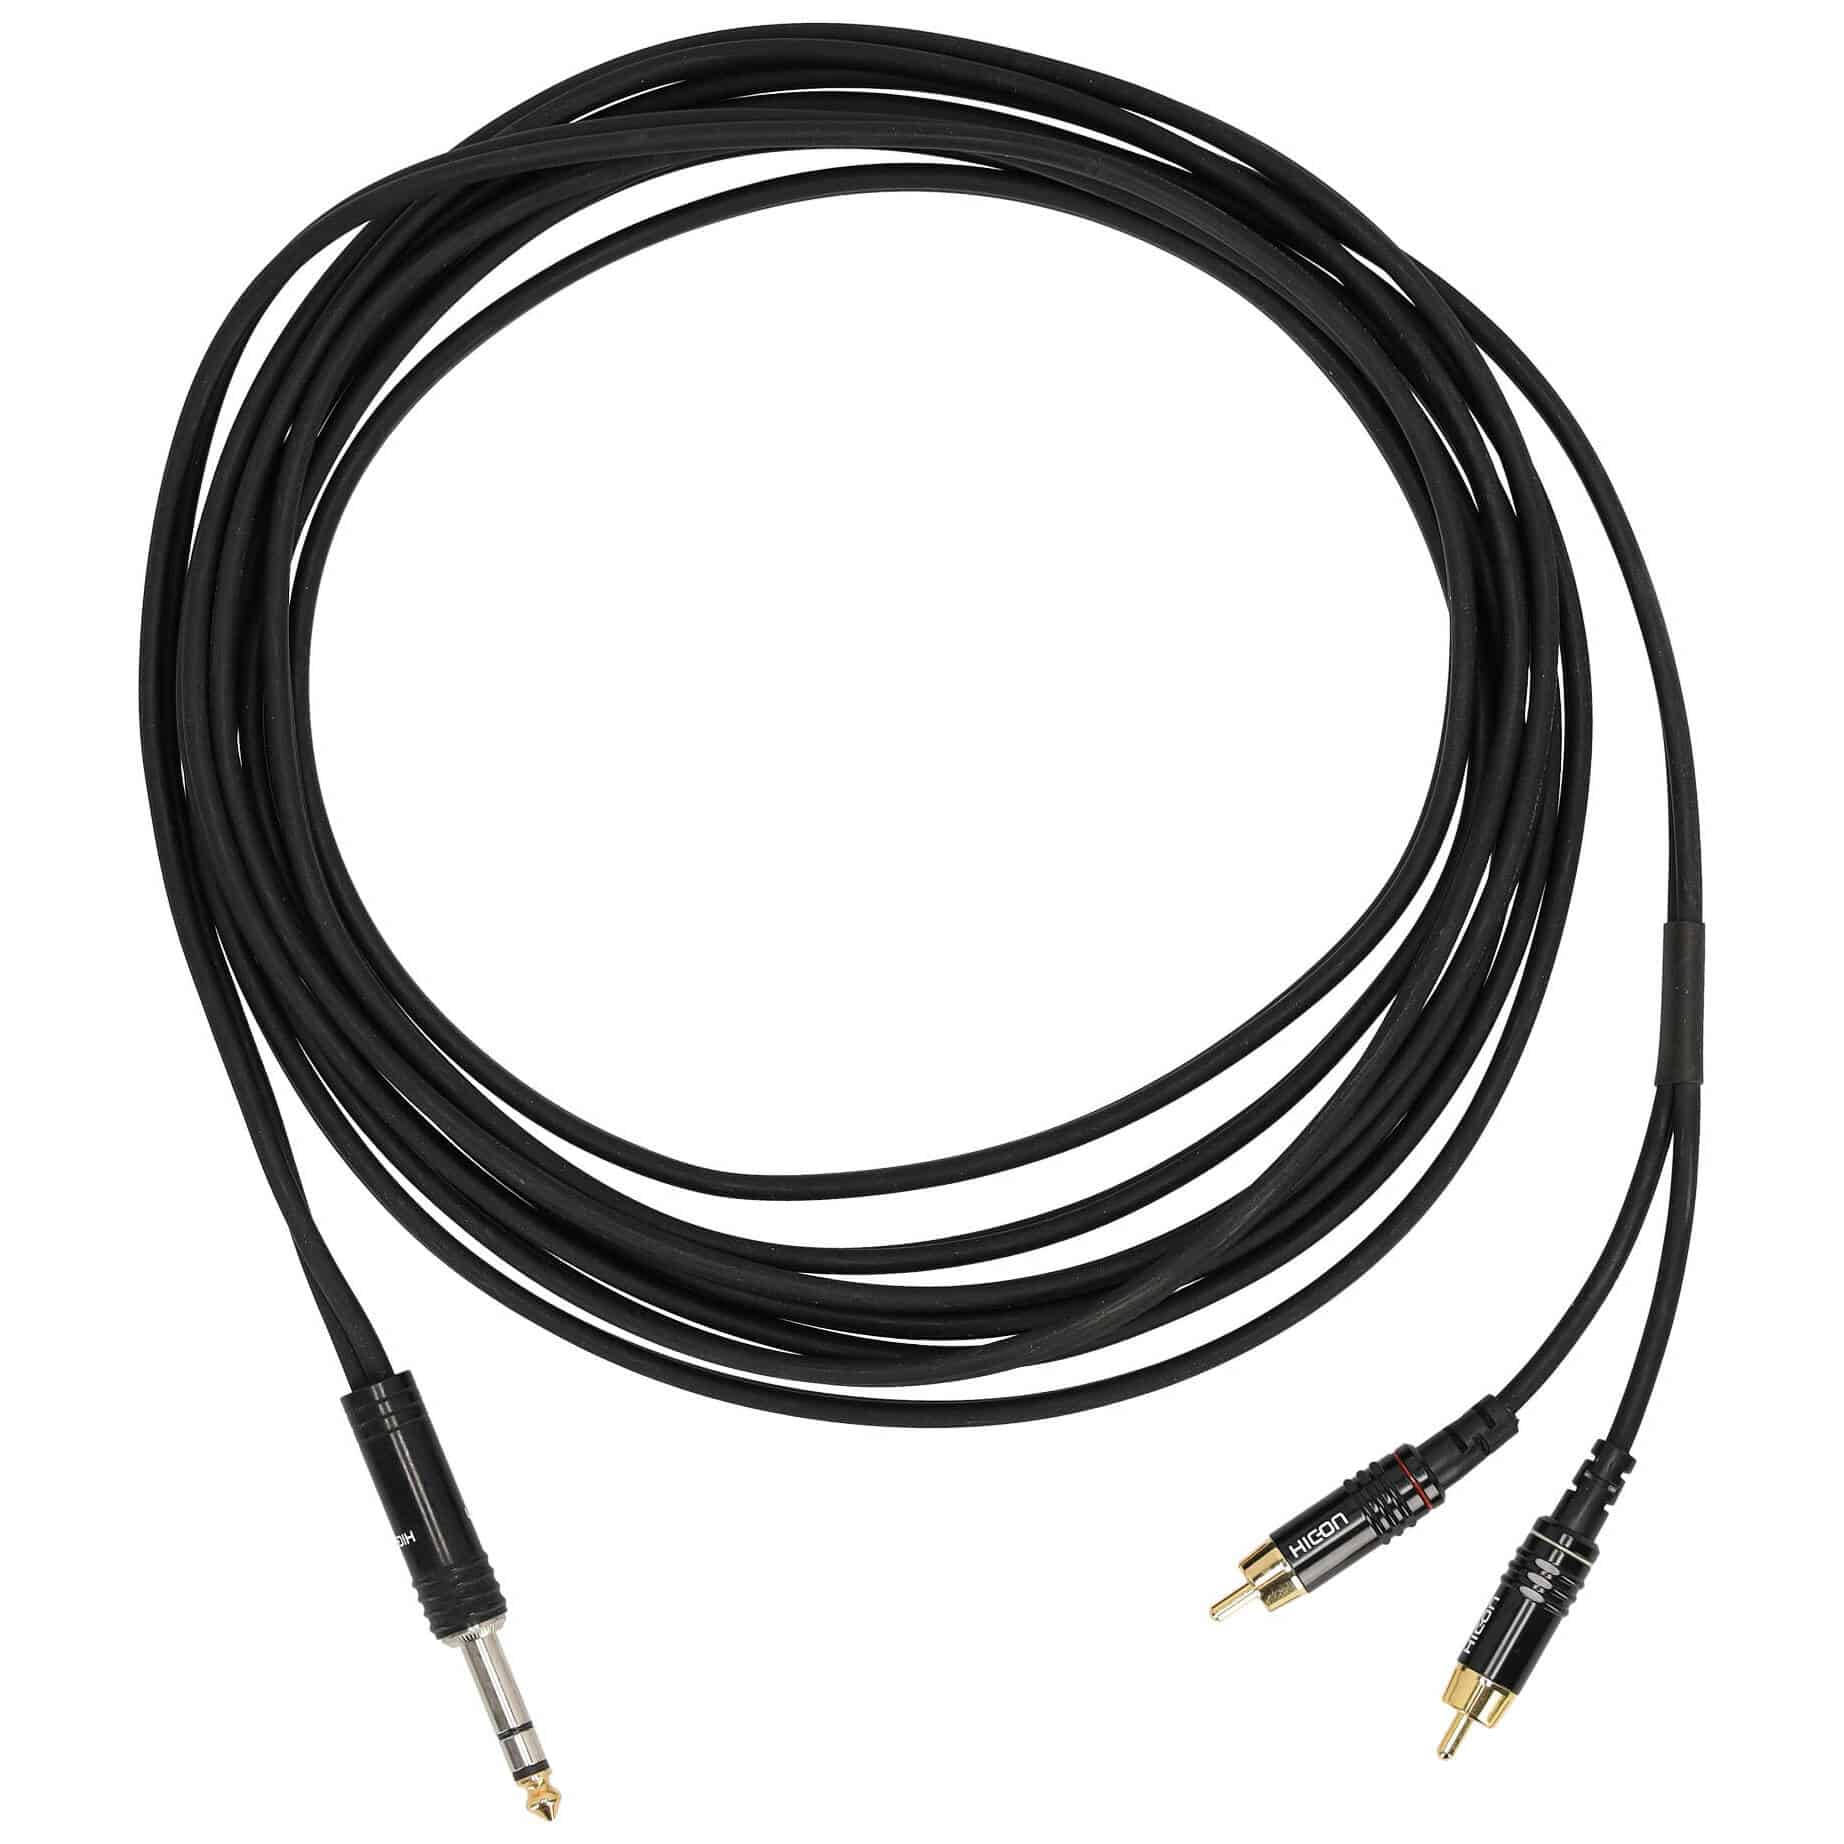 Sommer Cable ON56-0500-SW SC-Onyx Klinke Stereo Male - 2 x Cinch Male 5 Meter